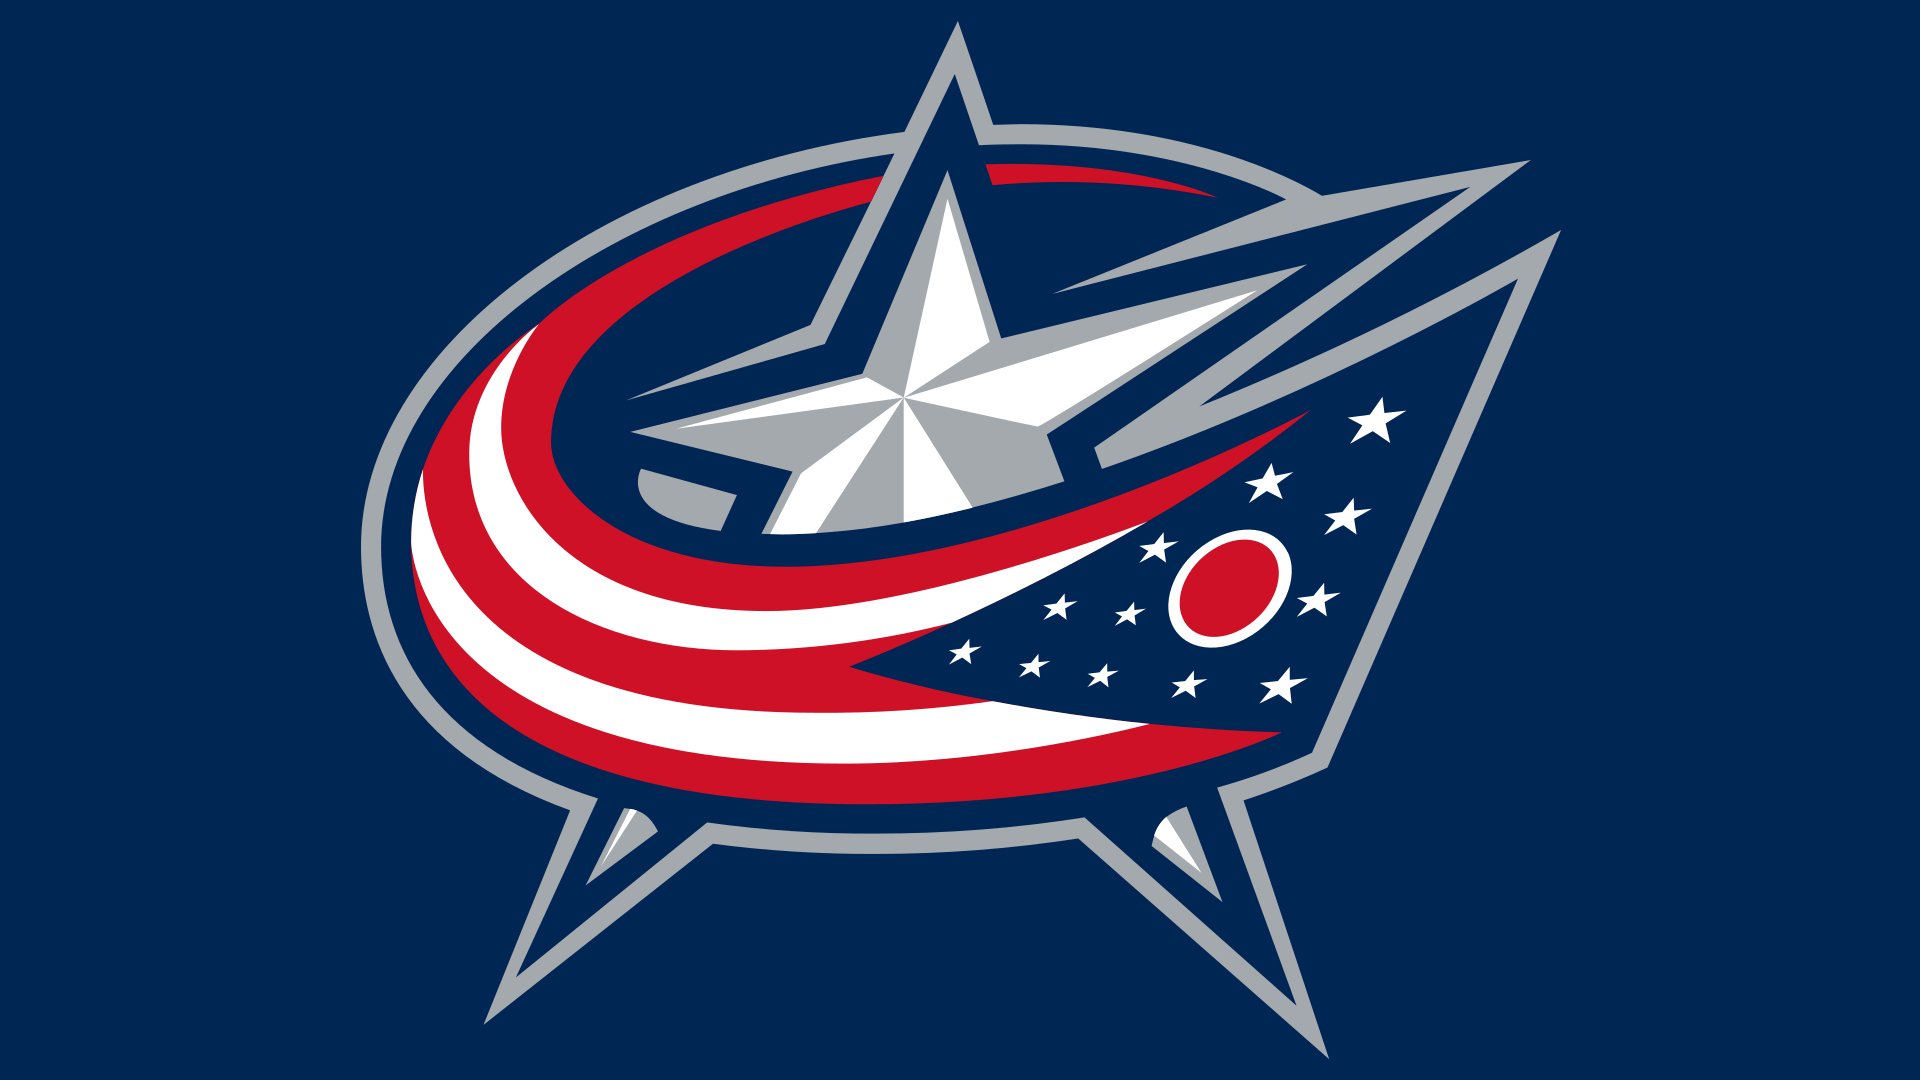 Meaning Columbus Blue Jackets logo and symbol | history and evolution1920 x 1080